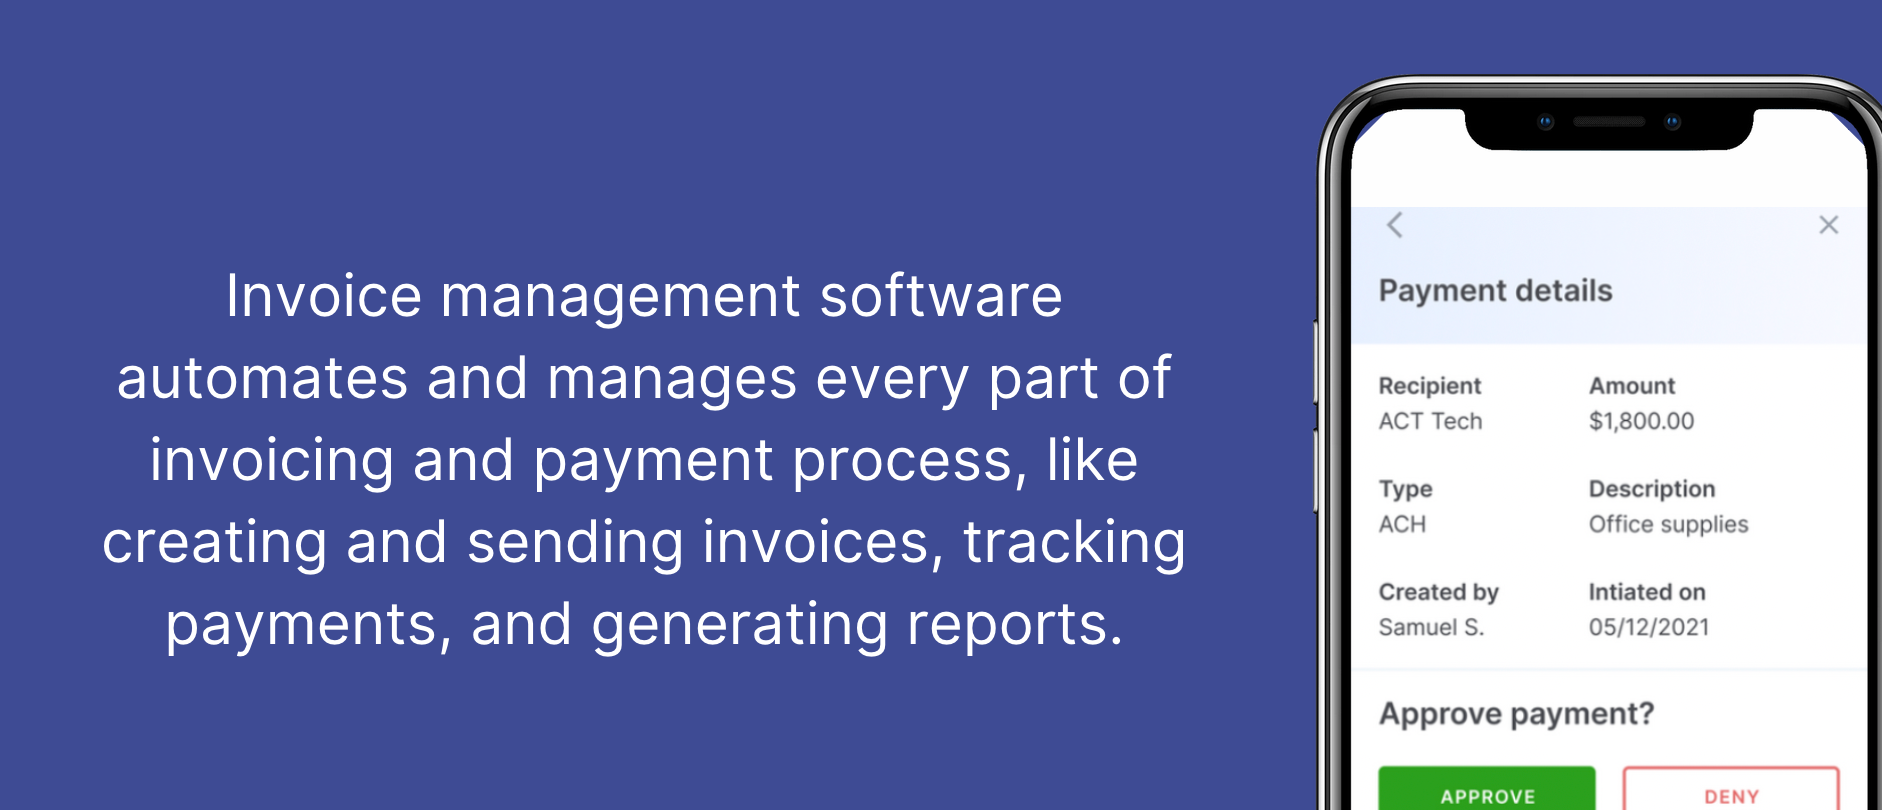 What is invoice management software